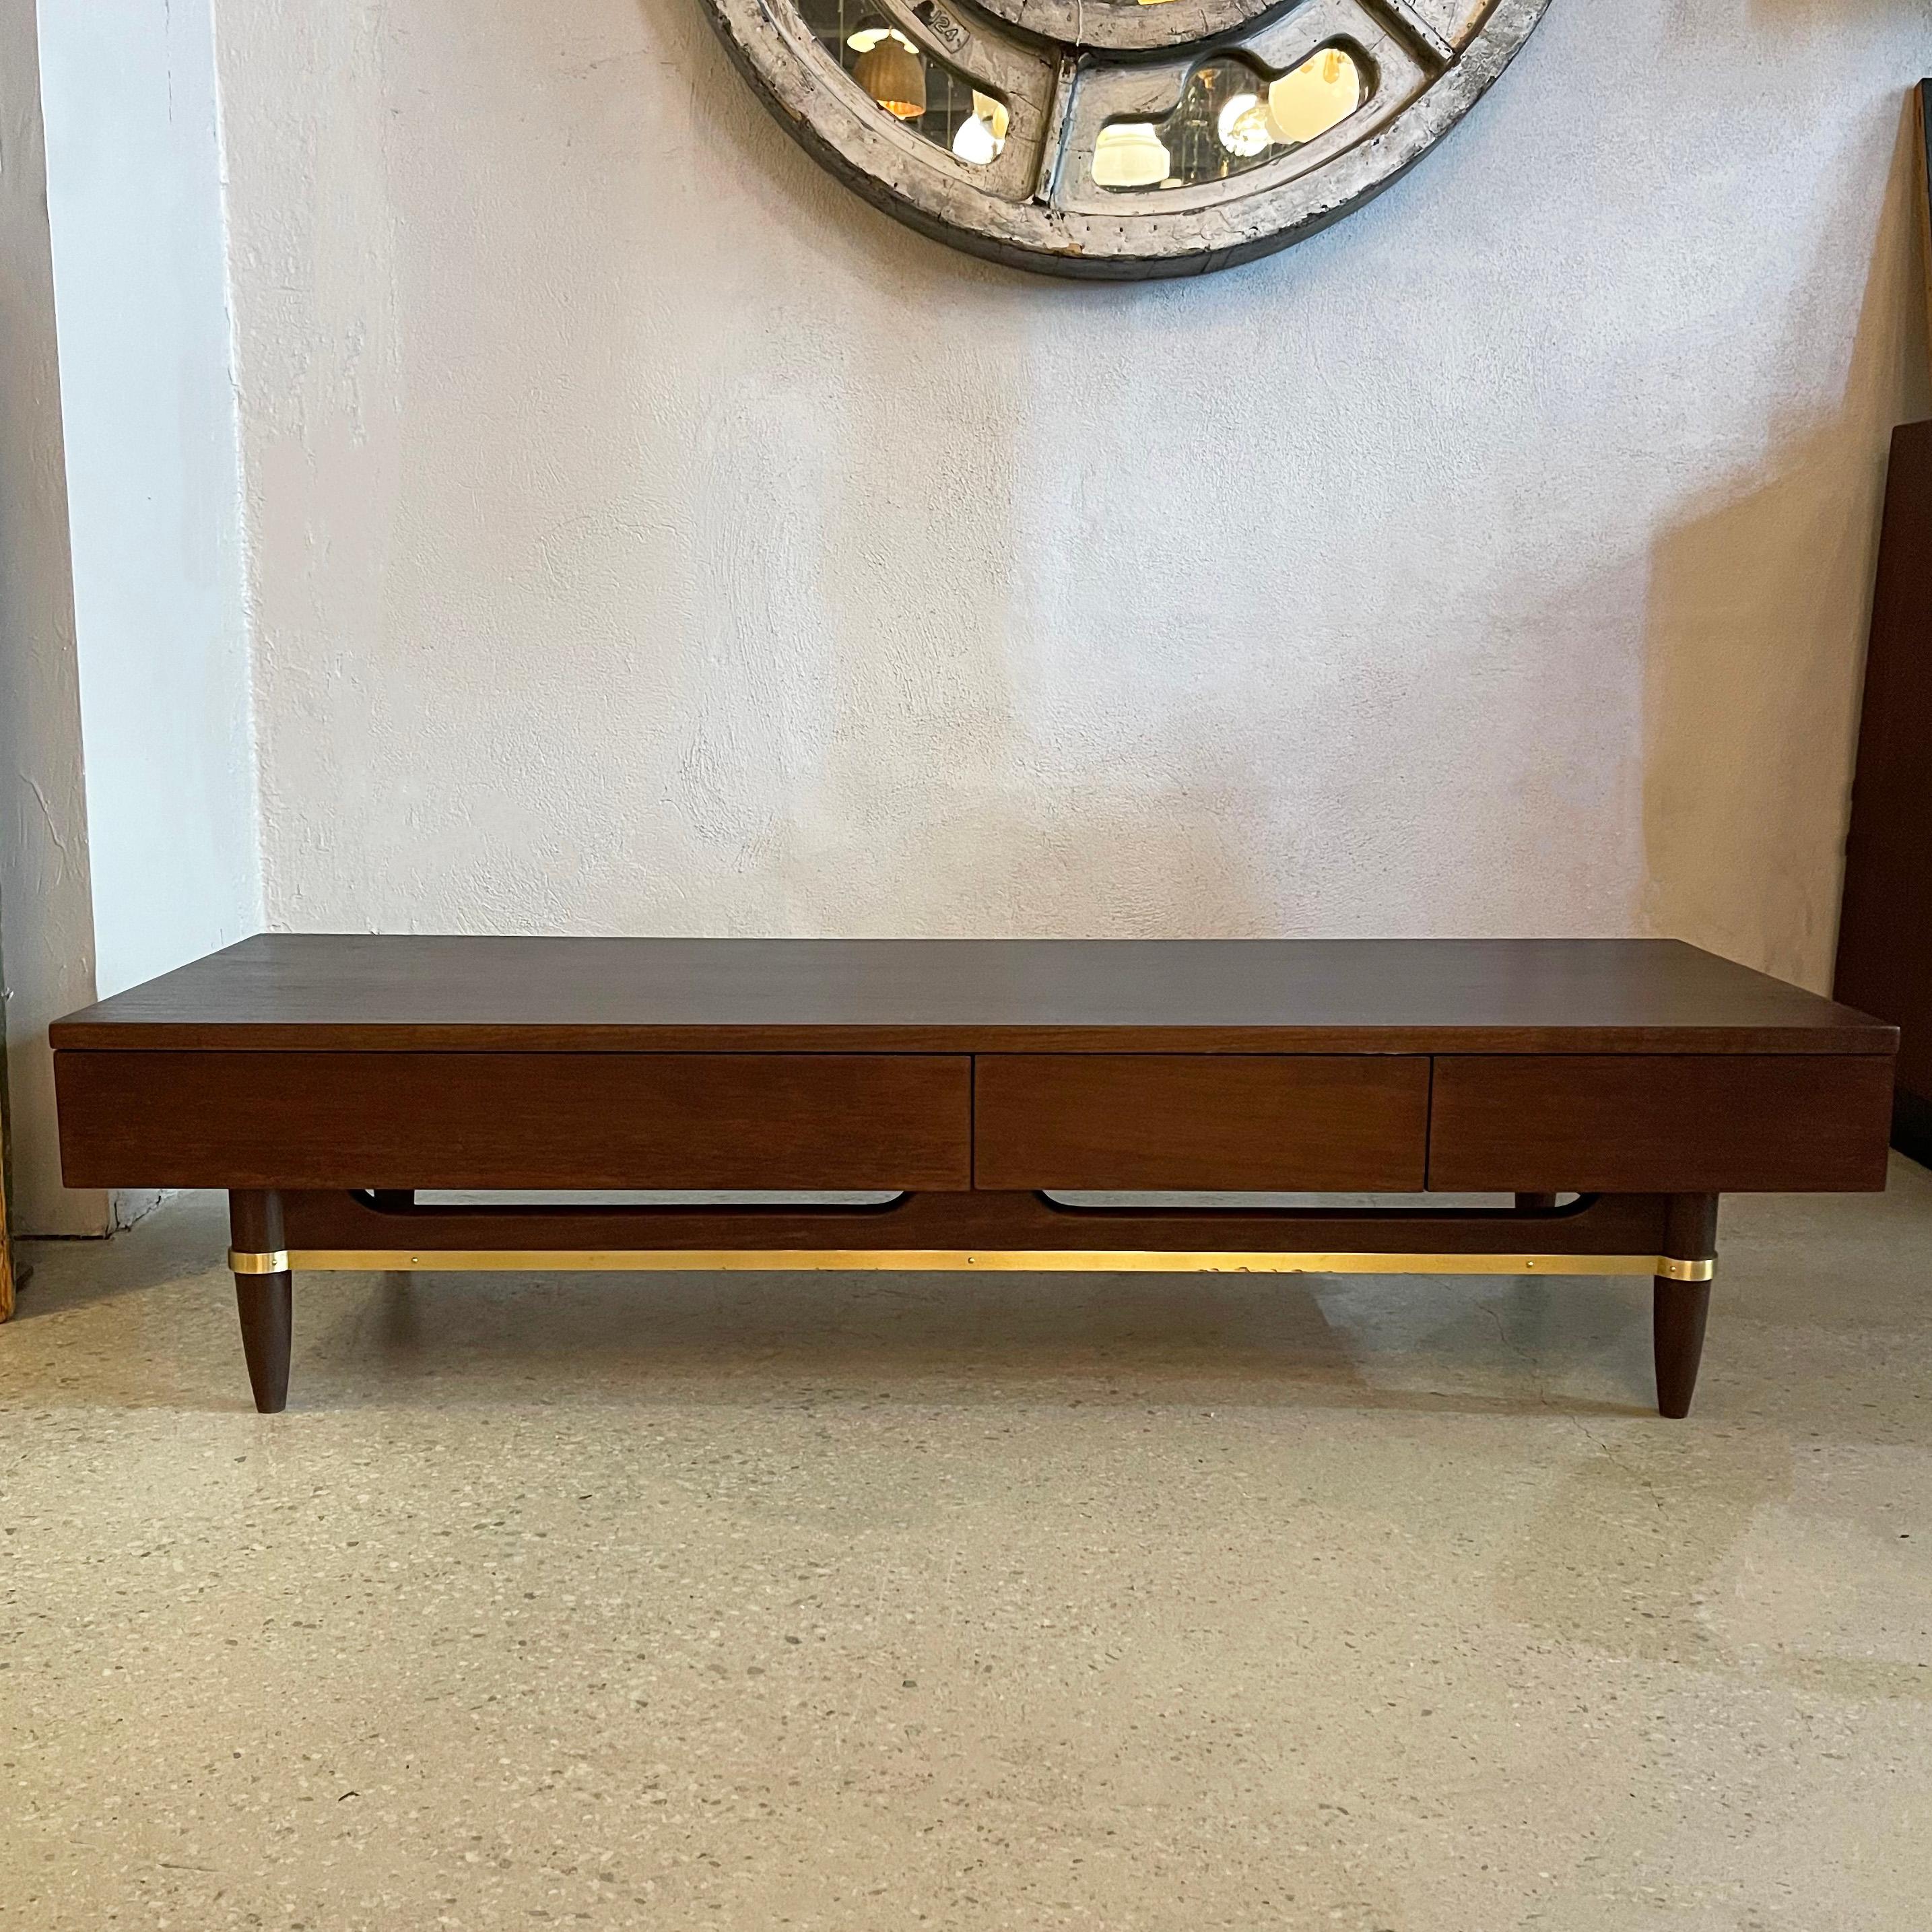 This versatile, multi-purpose, ebonized walnut and brass piece designed by Merton Gershon for American Of Martinsville works in many capacities. It is finished on 3 sides to go up against a wall which makes it perfect as a low console, media cabinet